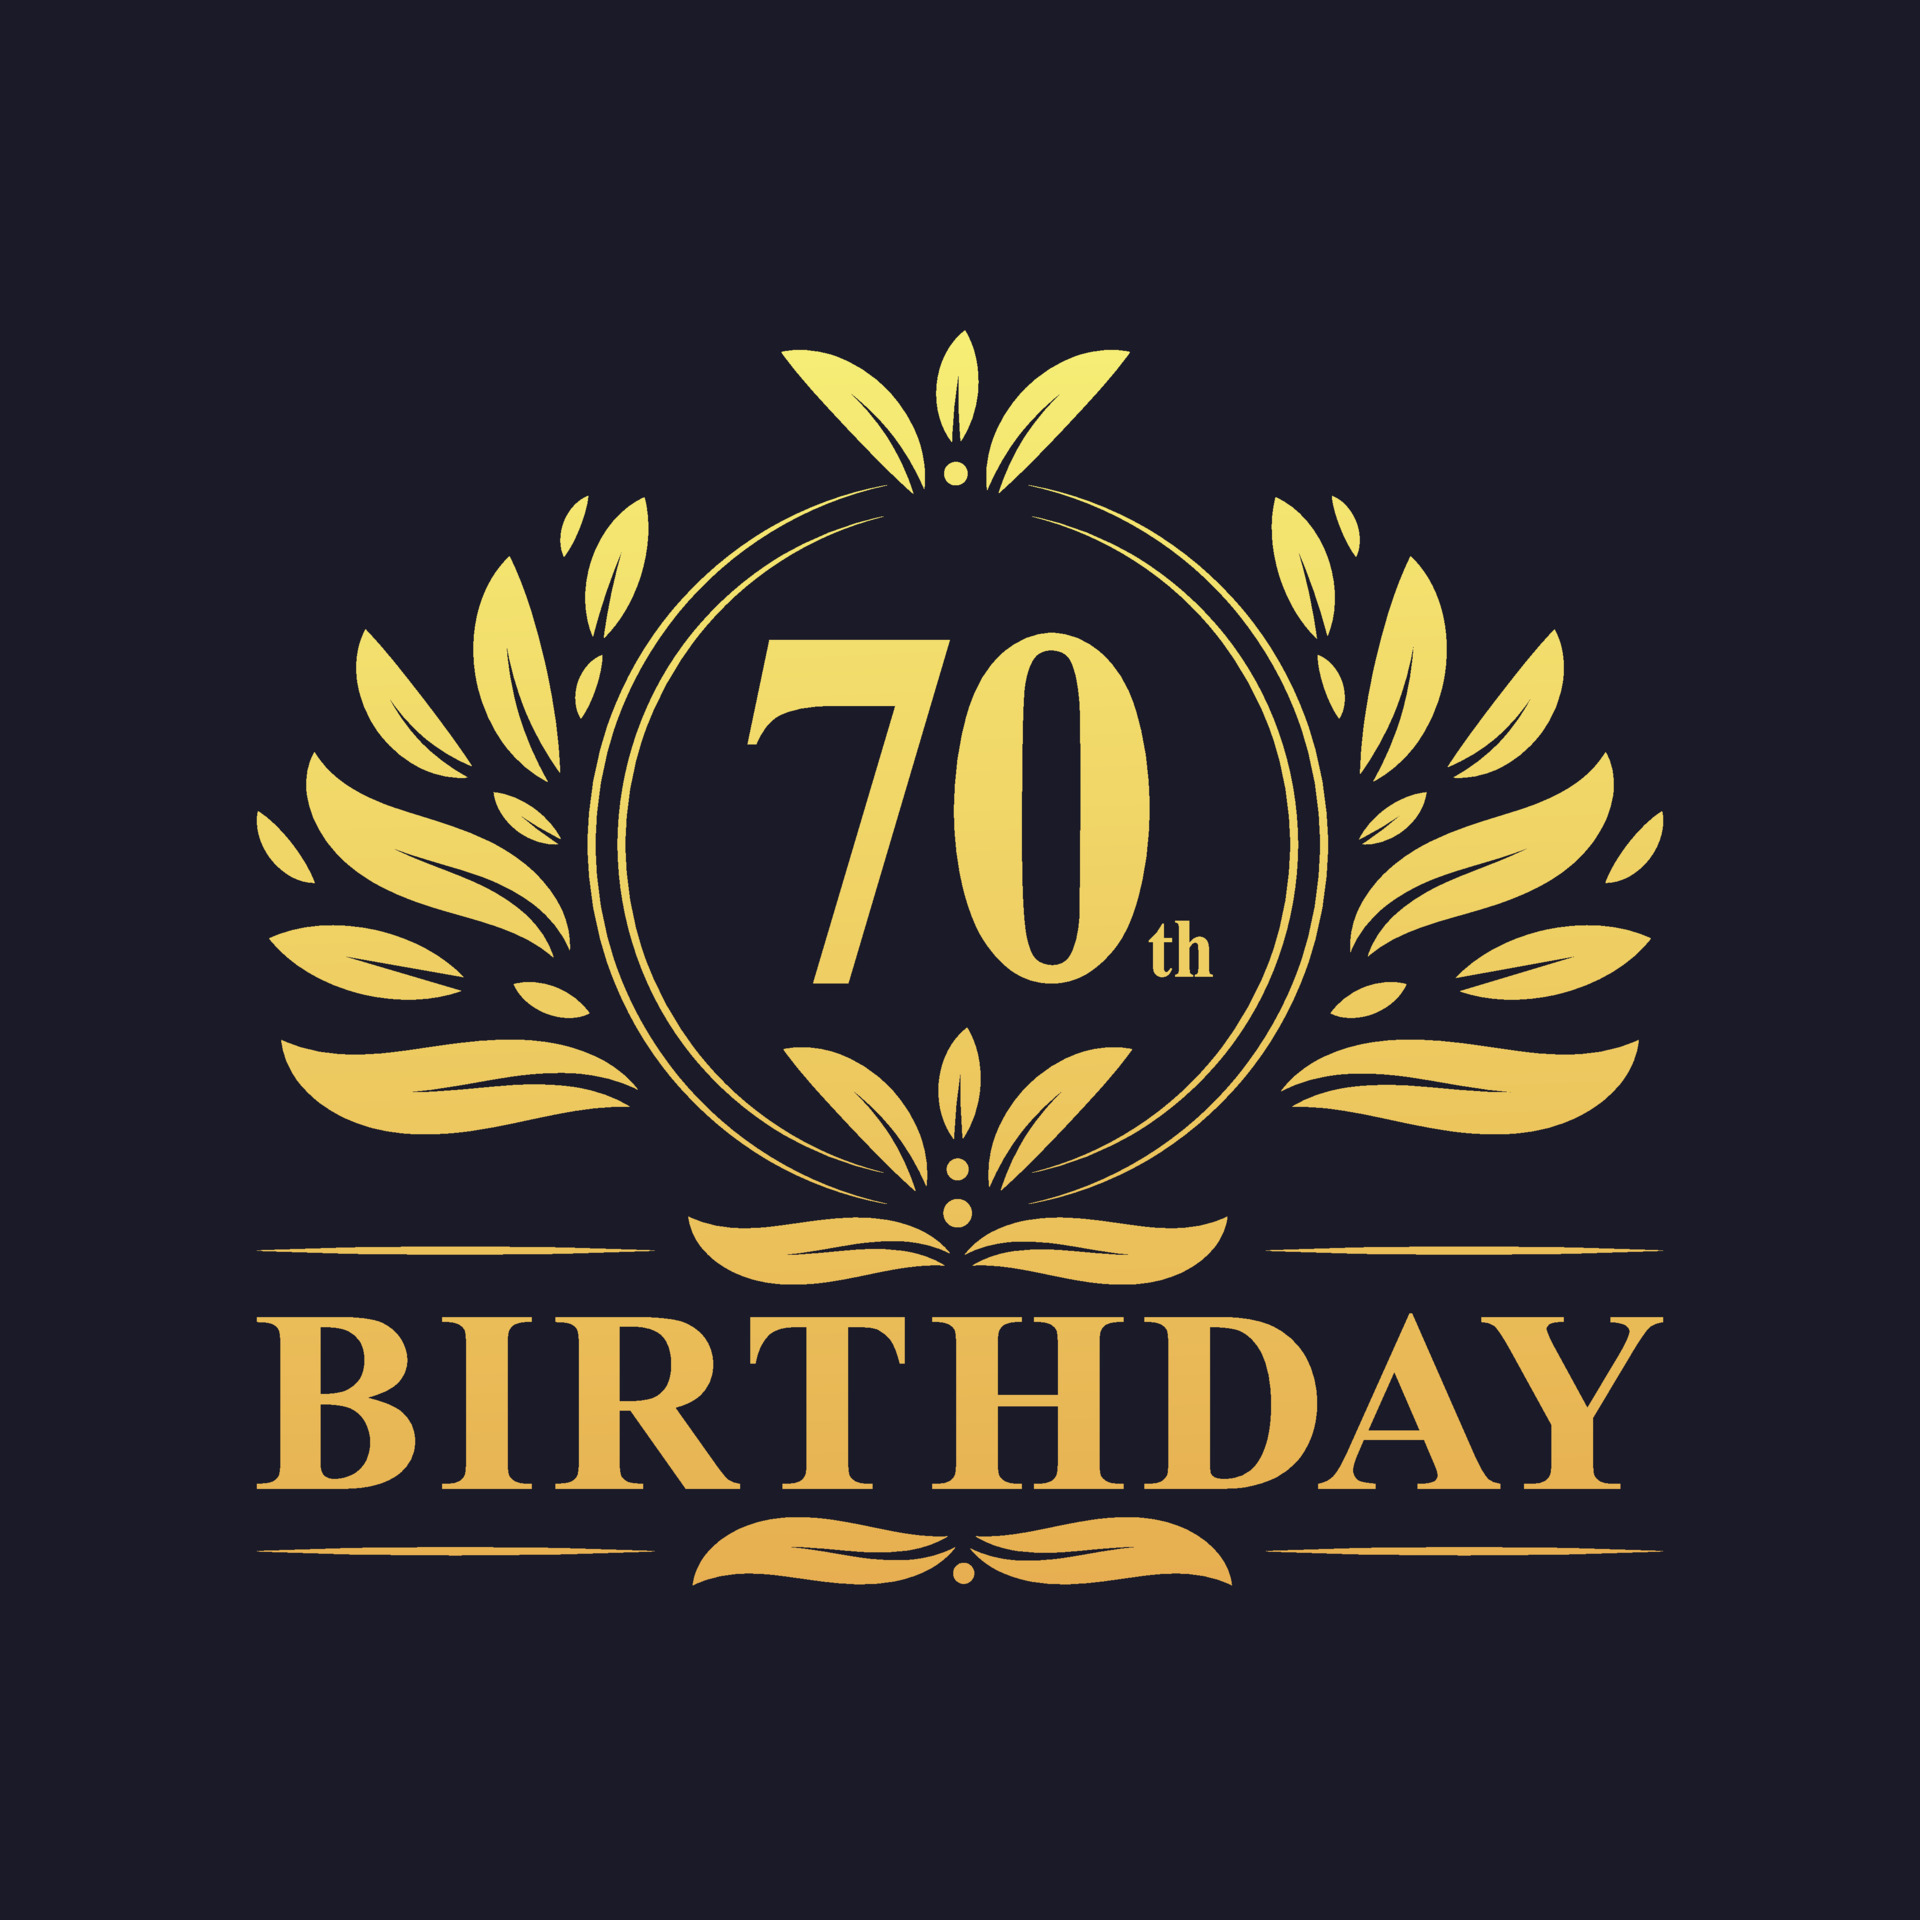 https://static.vecteezy.com/system/resources/previews/008/714/717/original/luxury-70th-birthday-logo-70-years-celebration-free-vector.jpg